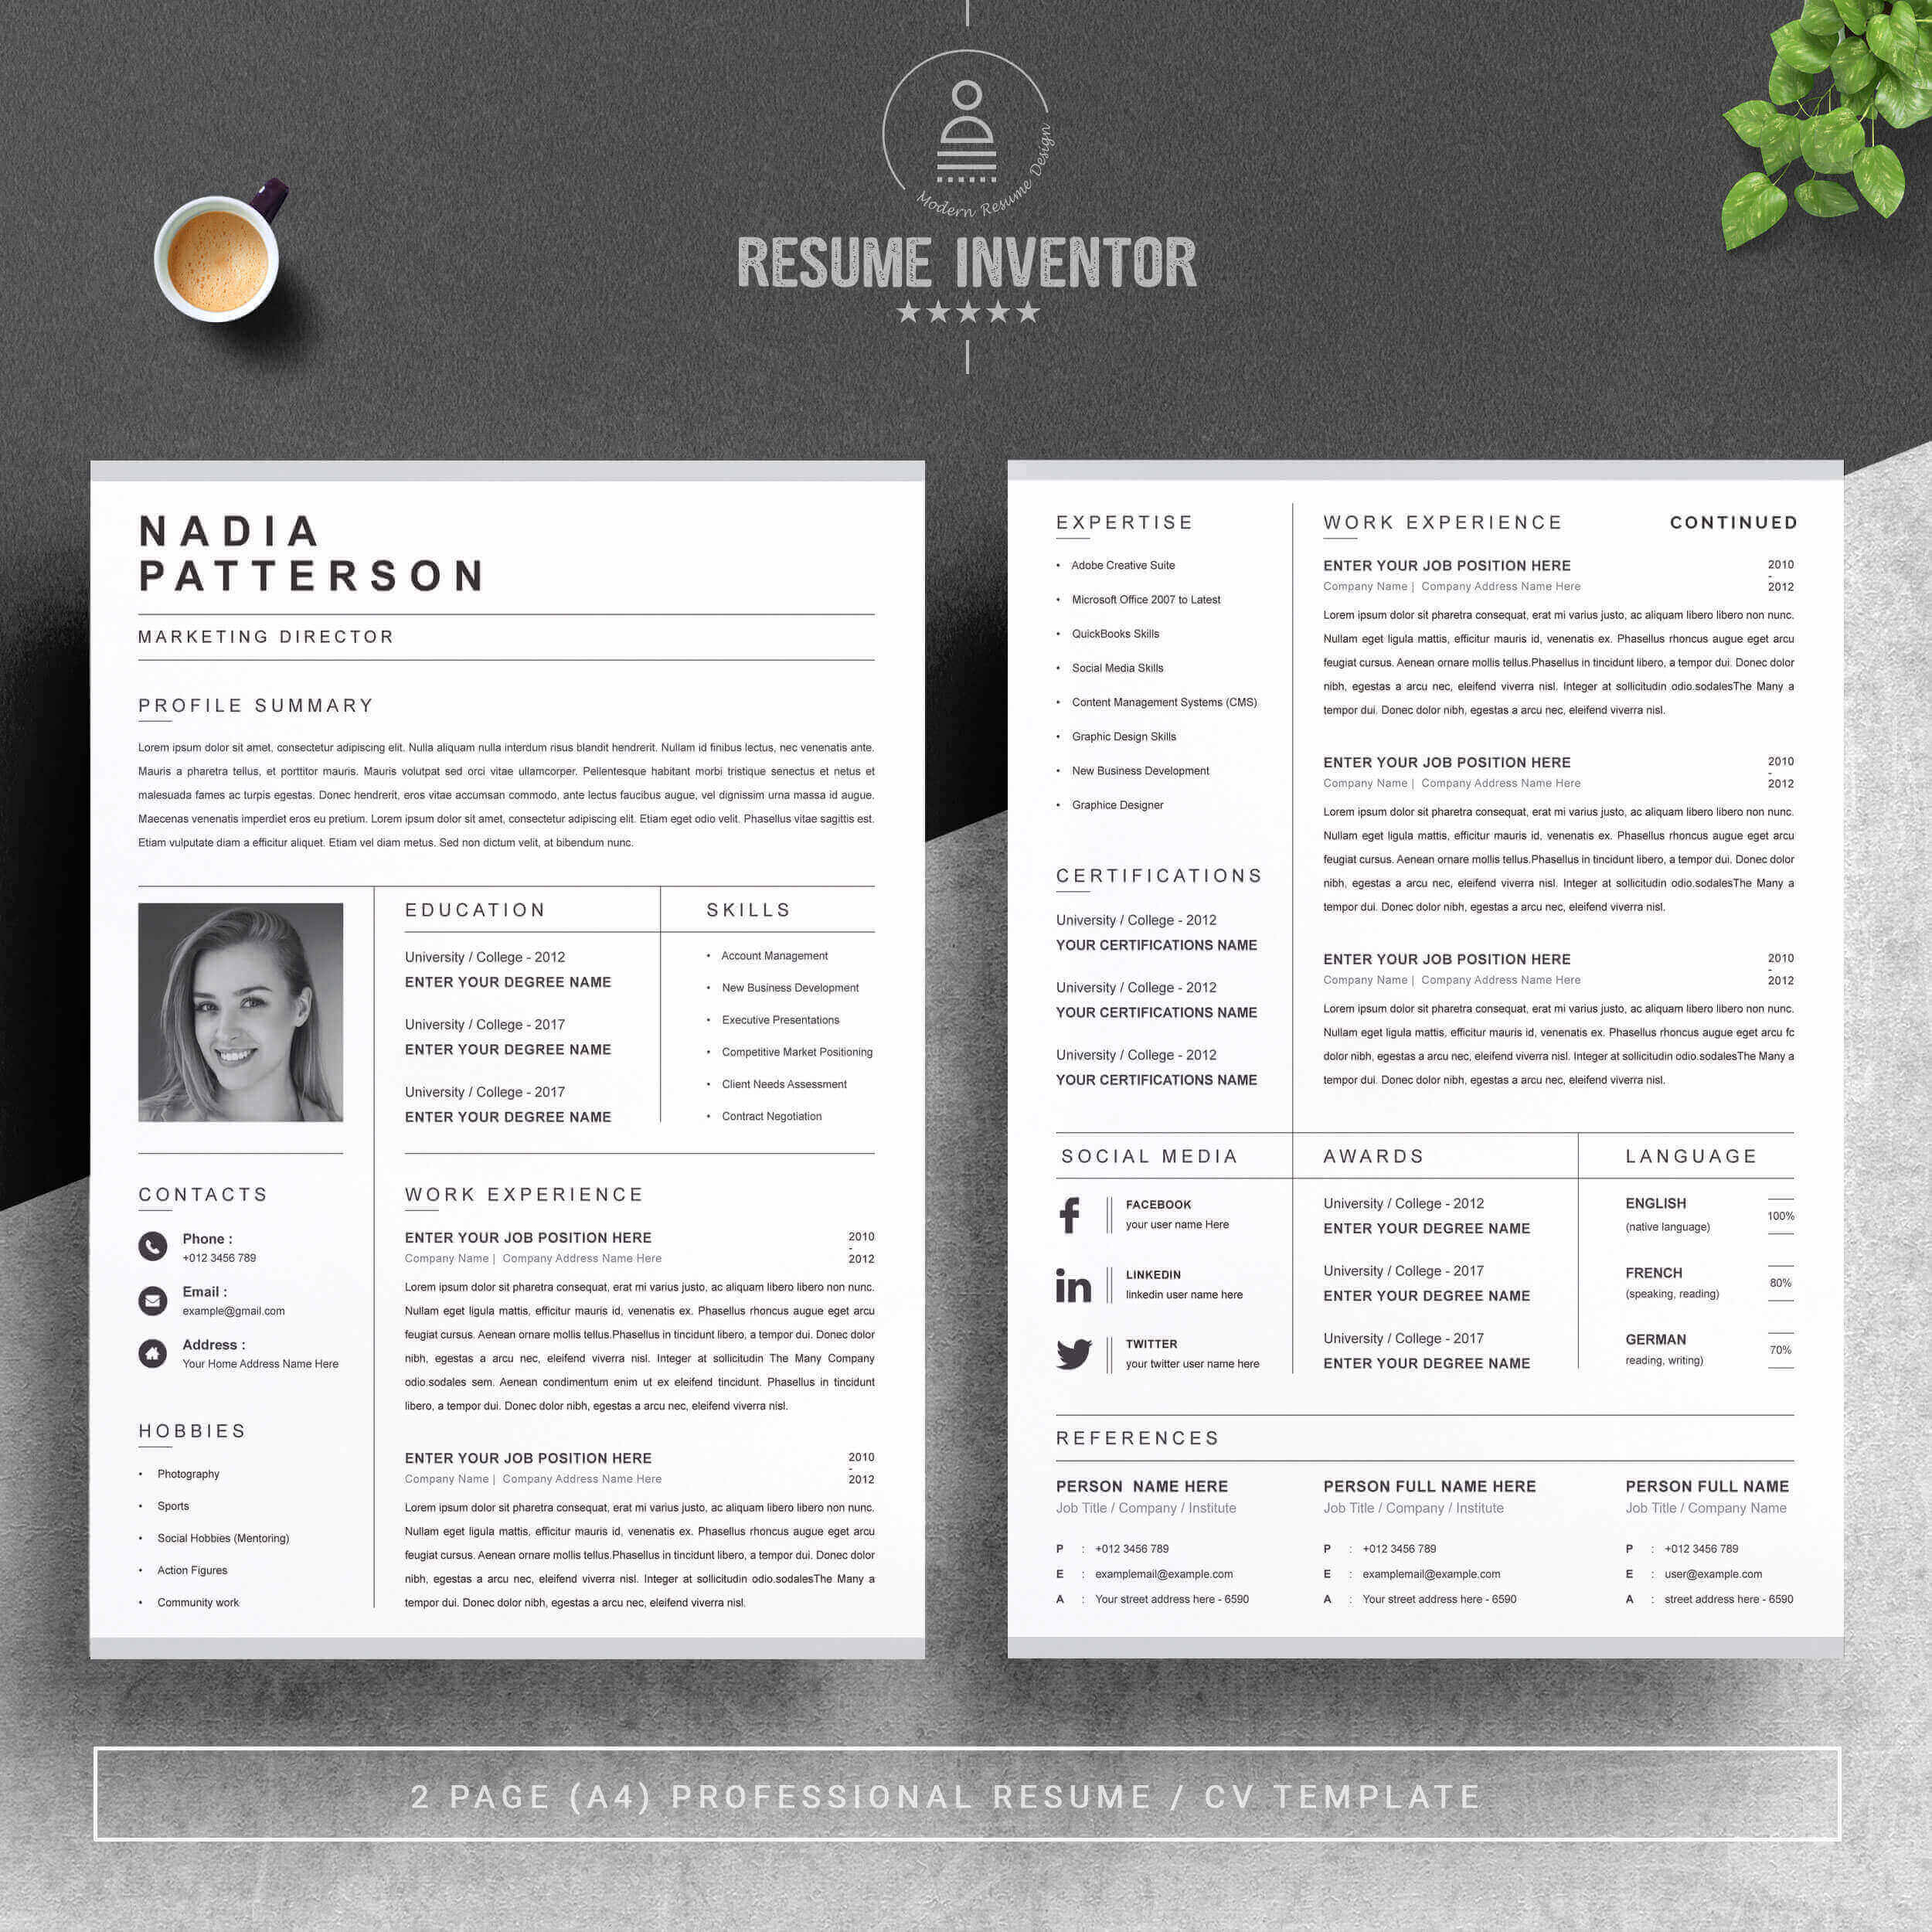 Marketing Director CV Template | Professional Resume | CV Template preview image.